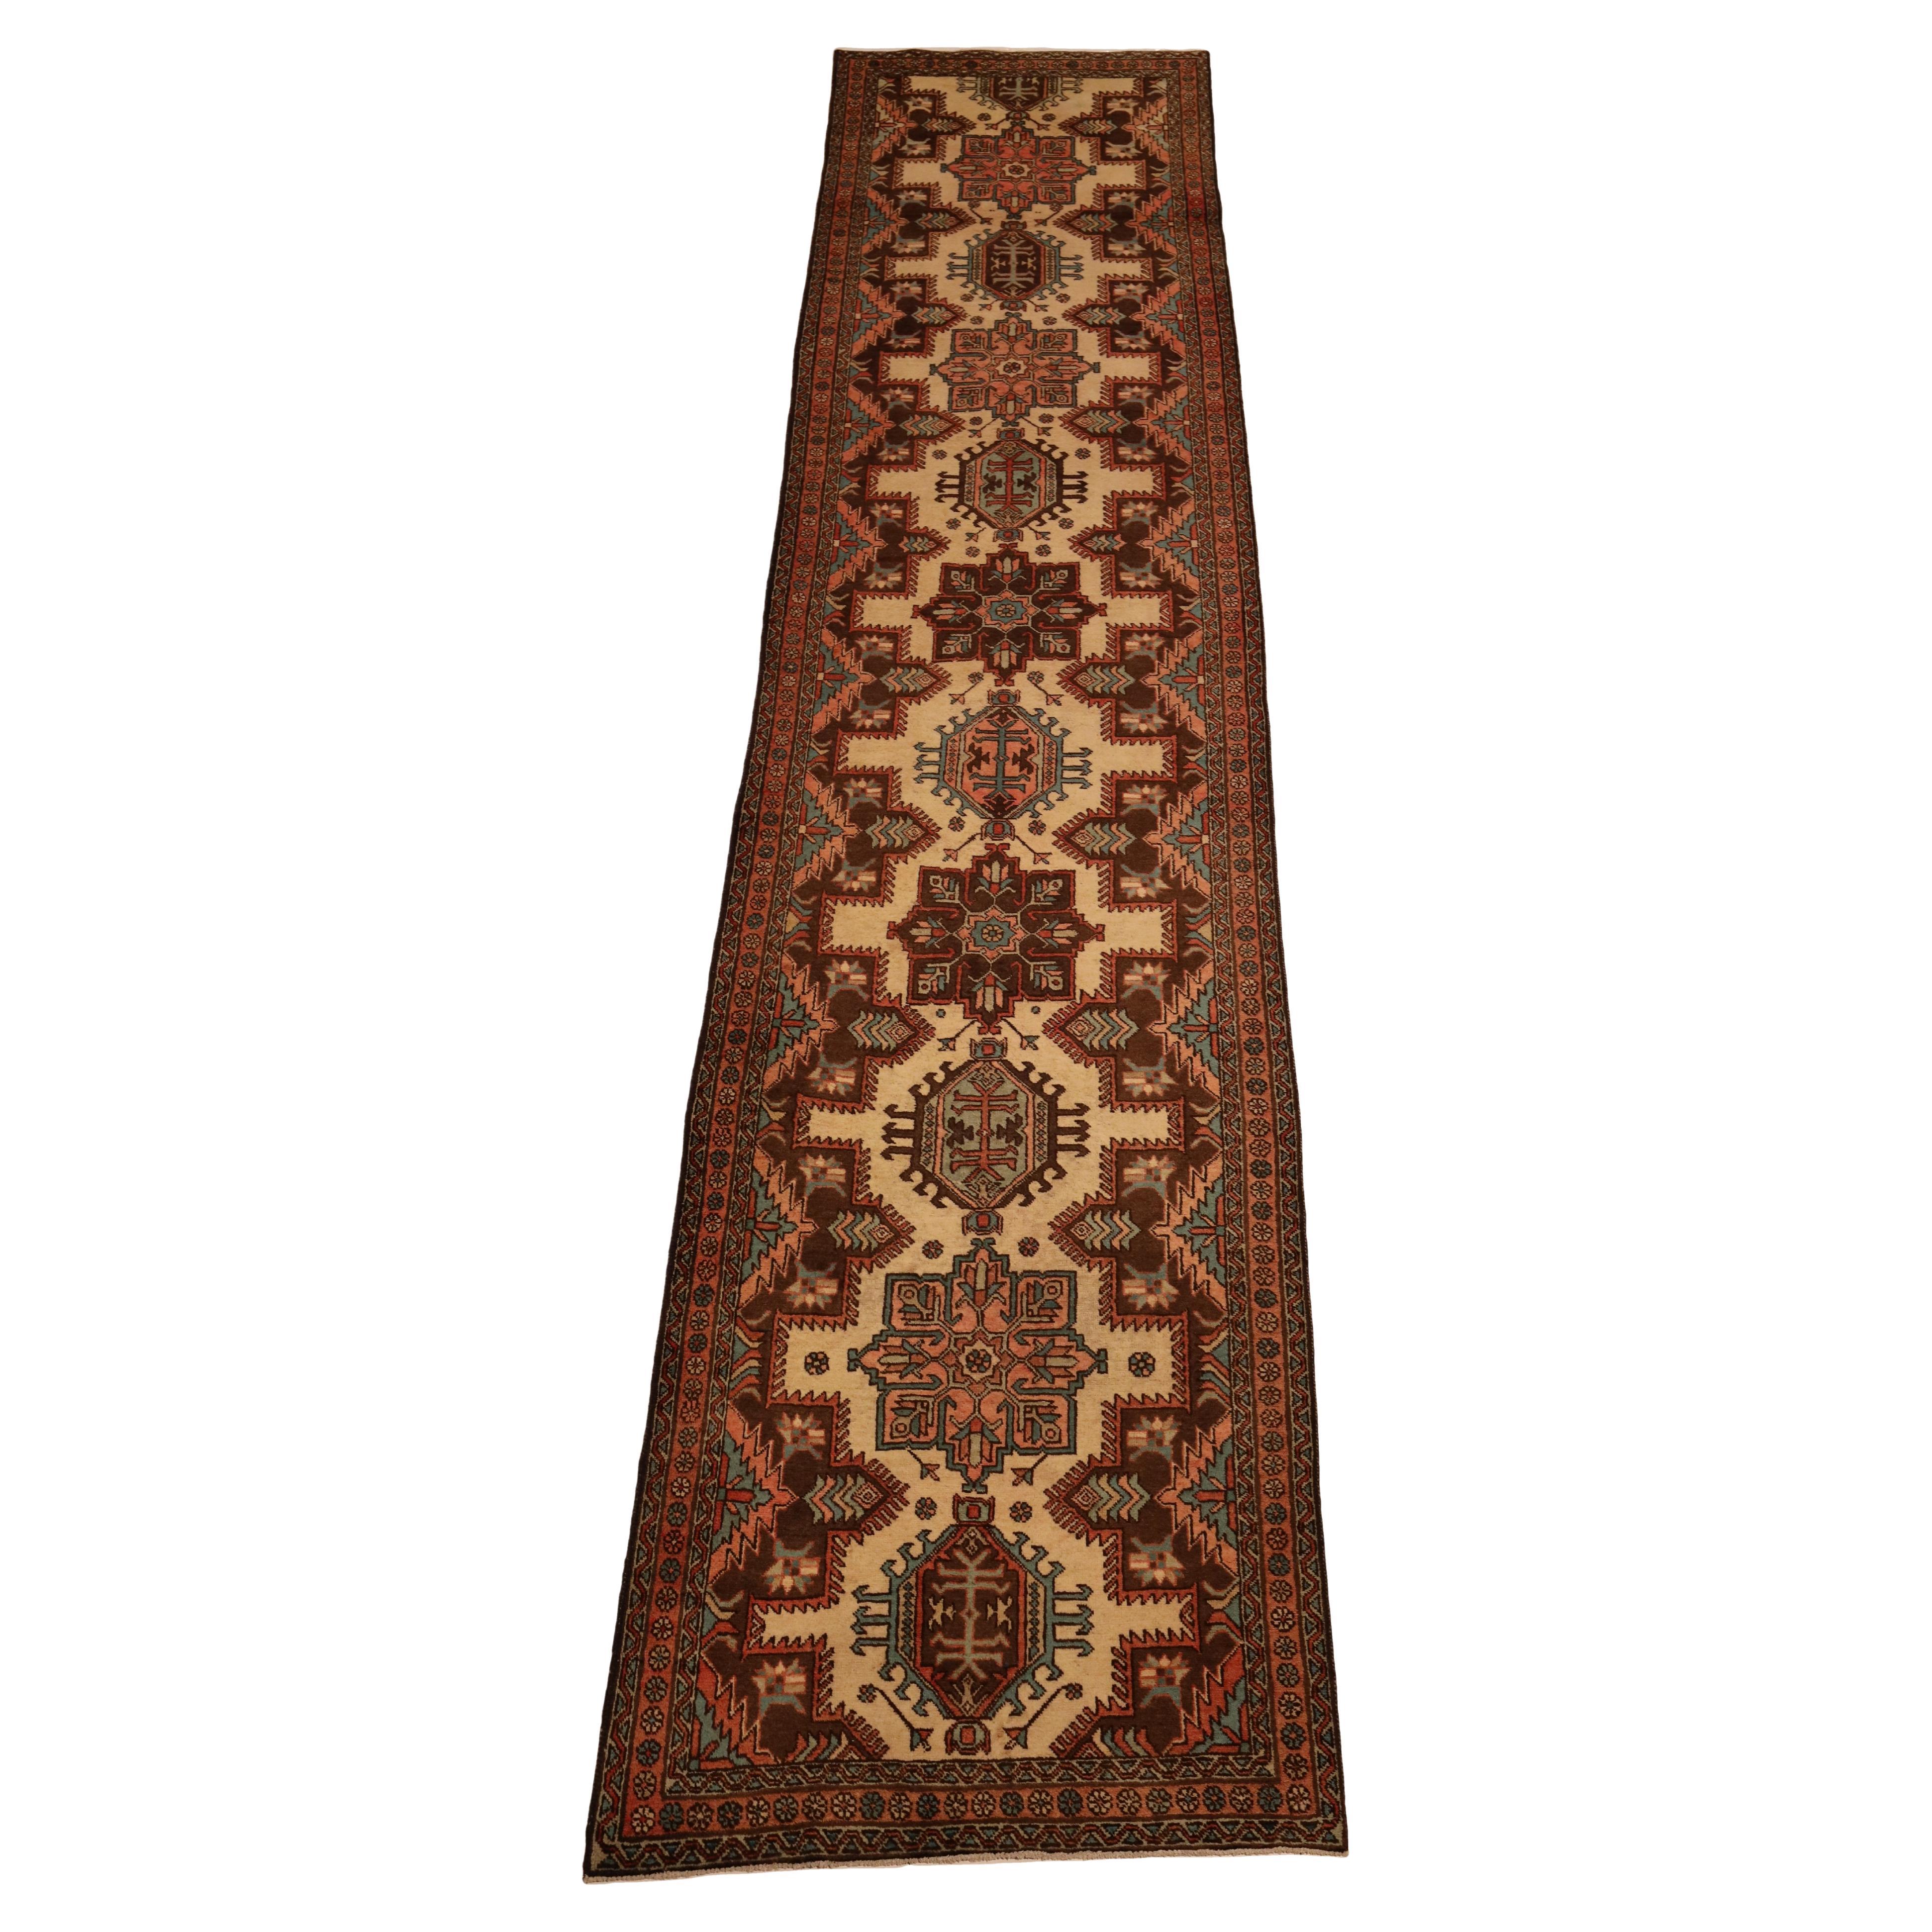 North-West Persian Antique Runner - 3'3" x 14'4"